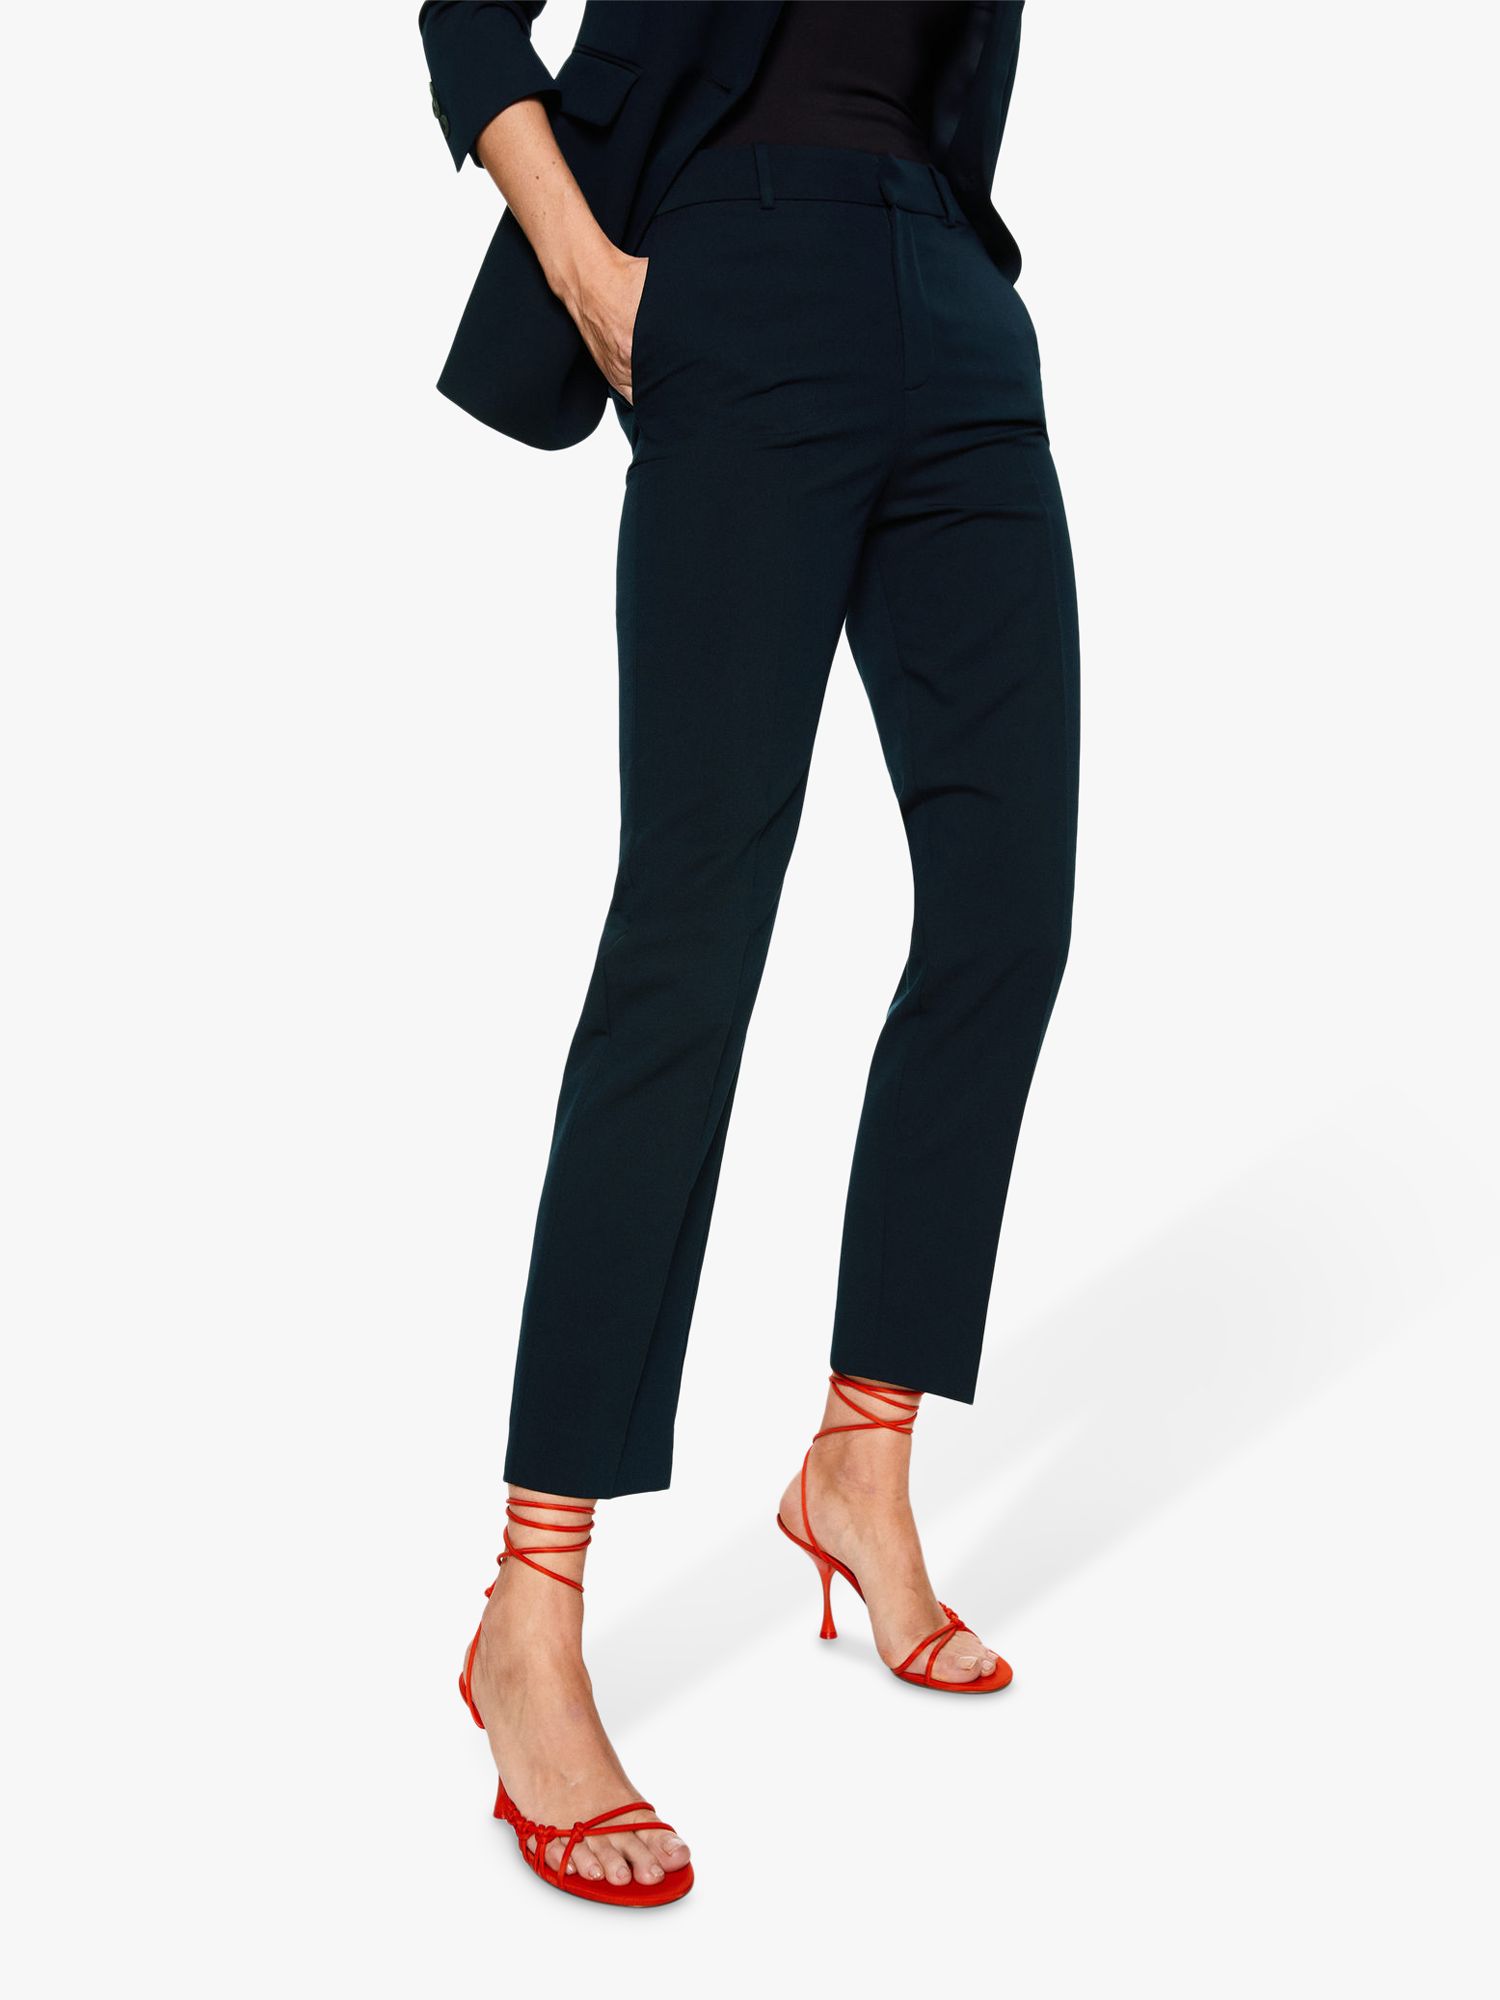 Mango Boreal Tailored Trousers, Navy at John Lewis & Partners